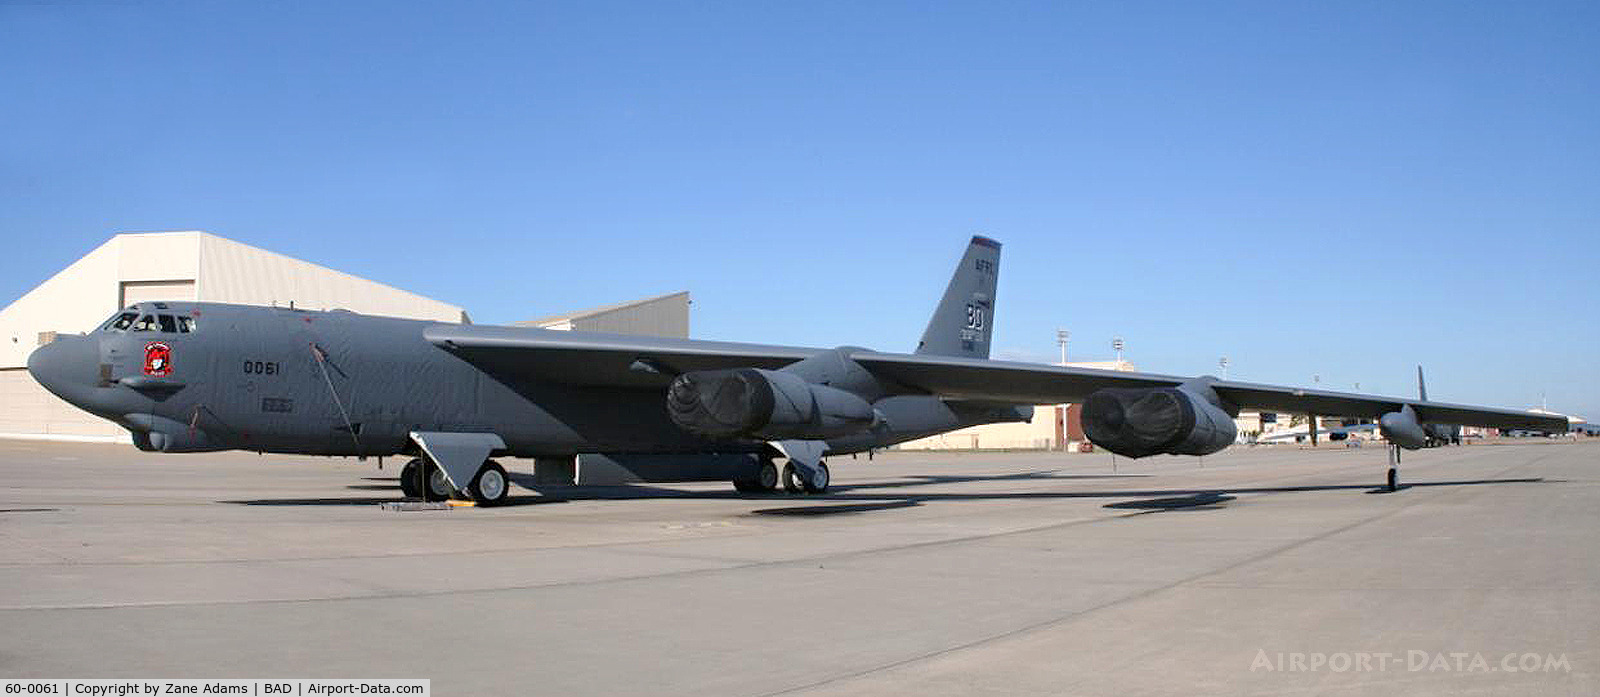 60-0061, 1960 Boeing B-52H Stratofortress C/N 464426, On the ramp at Barksdale AFB